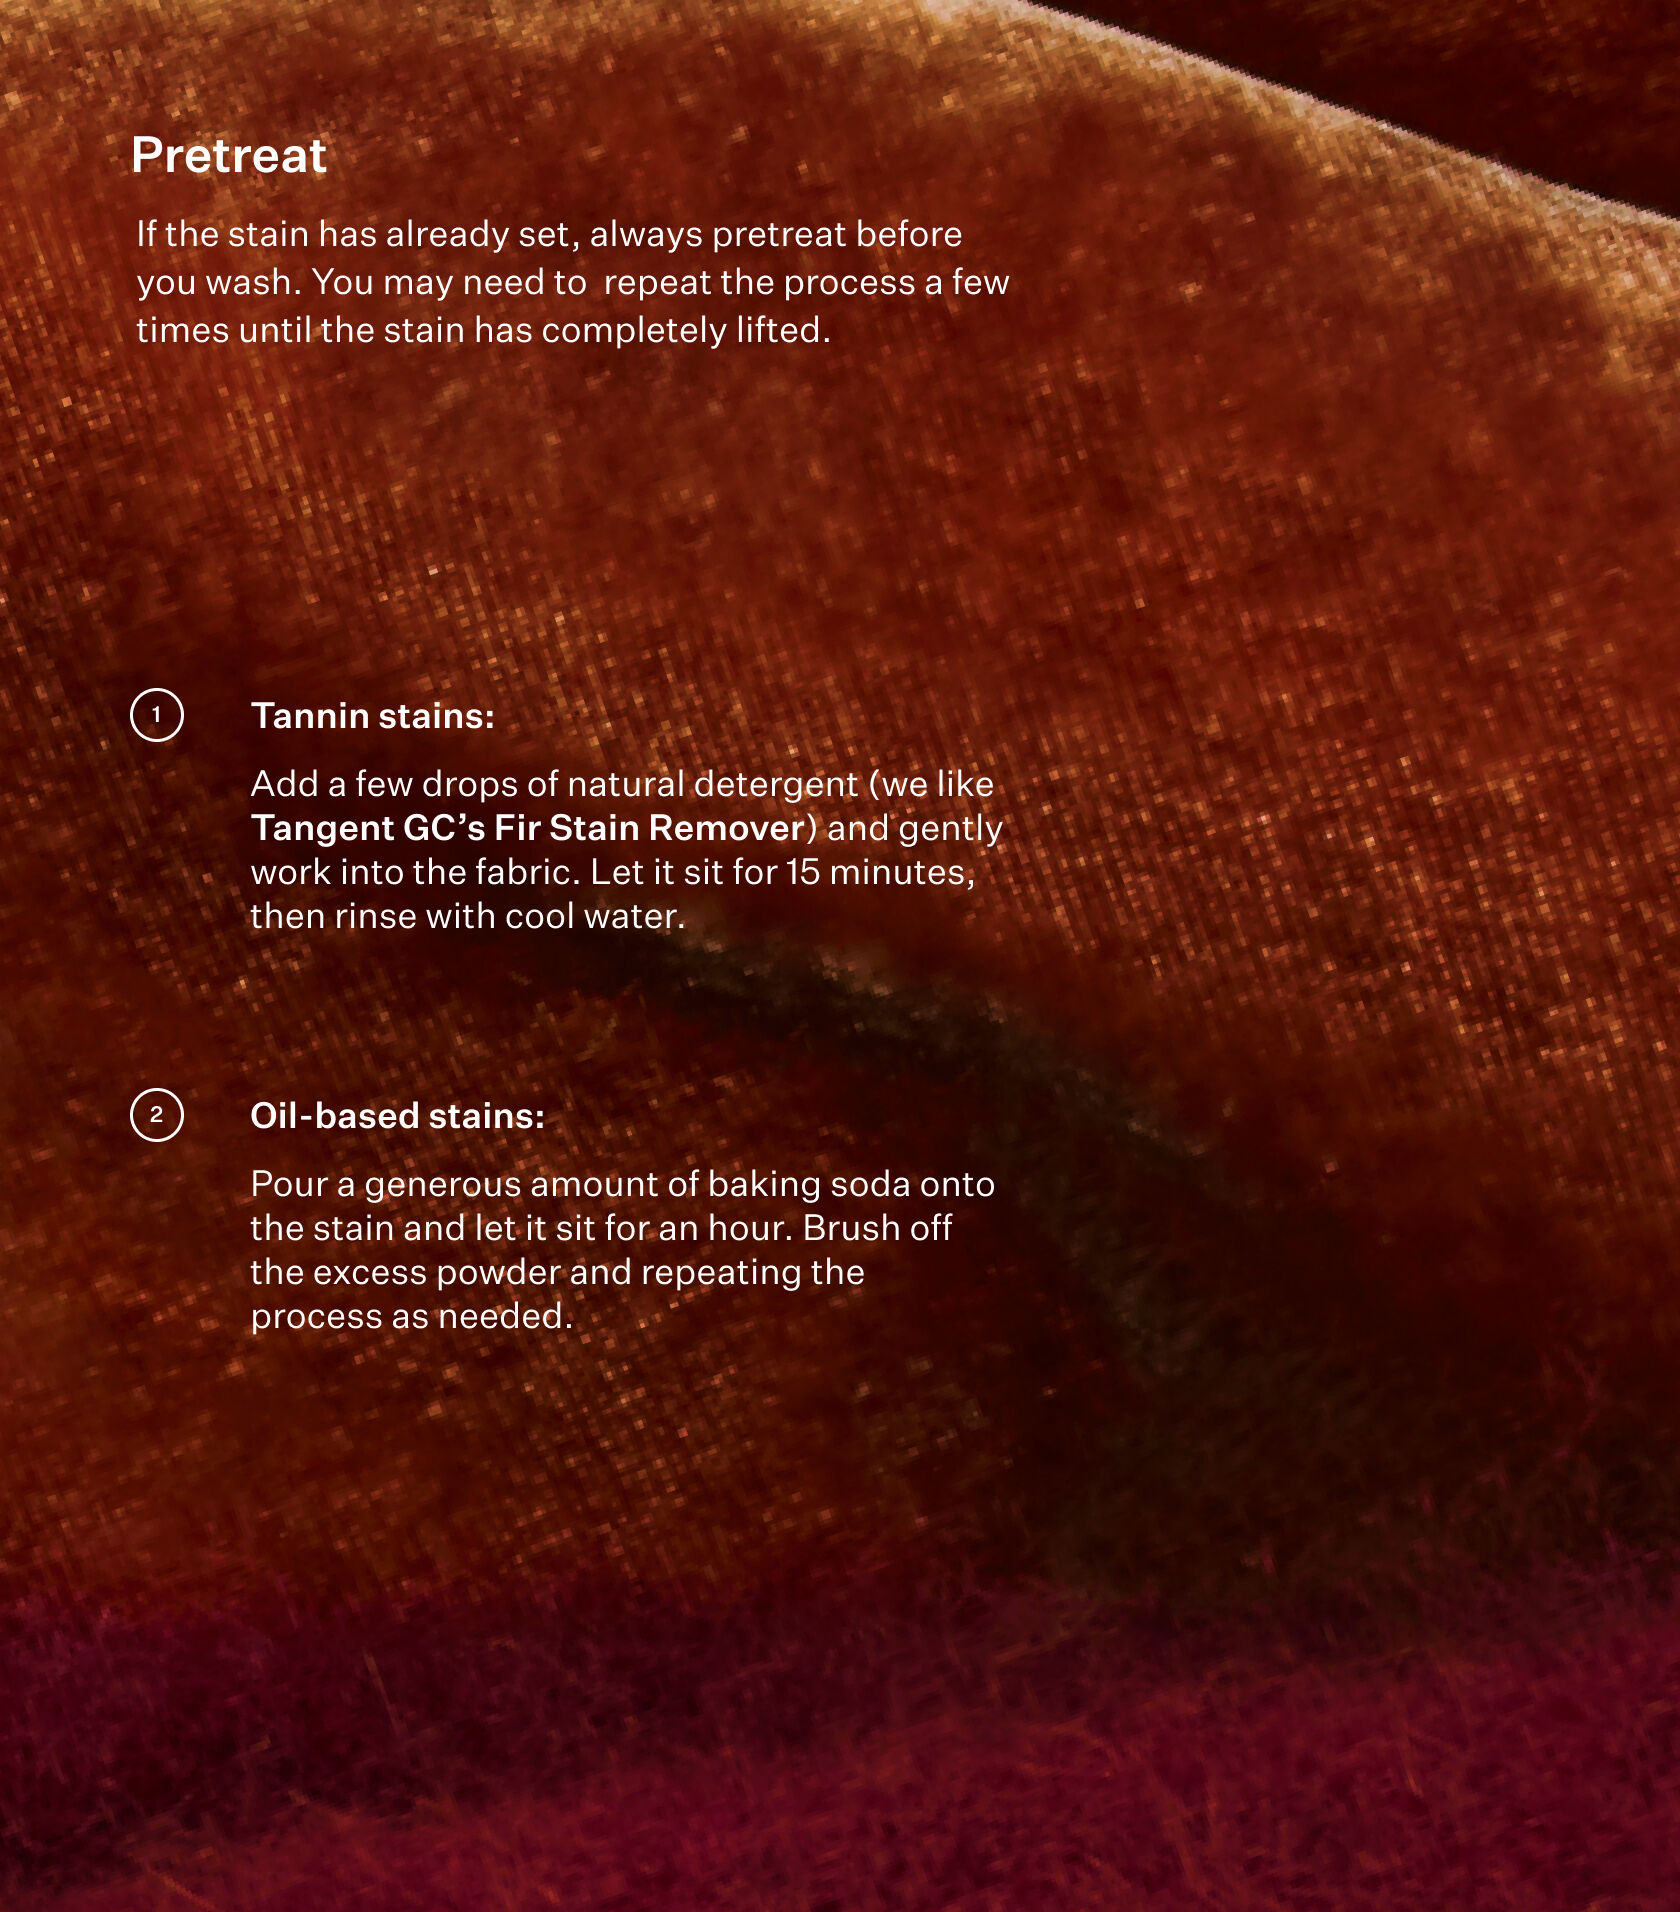 Infographic on how to pretreat stained velvet clothing at home.